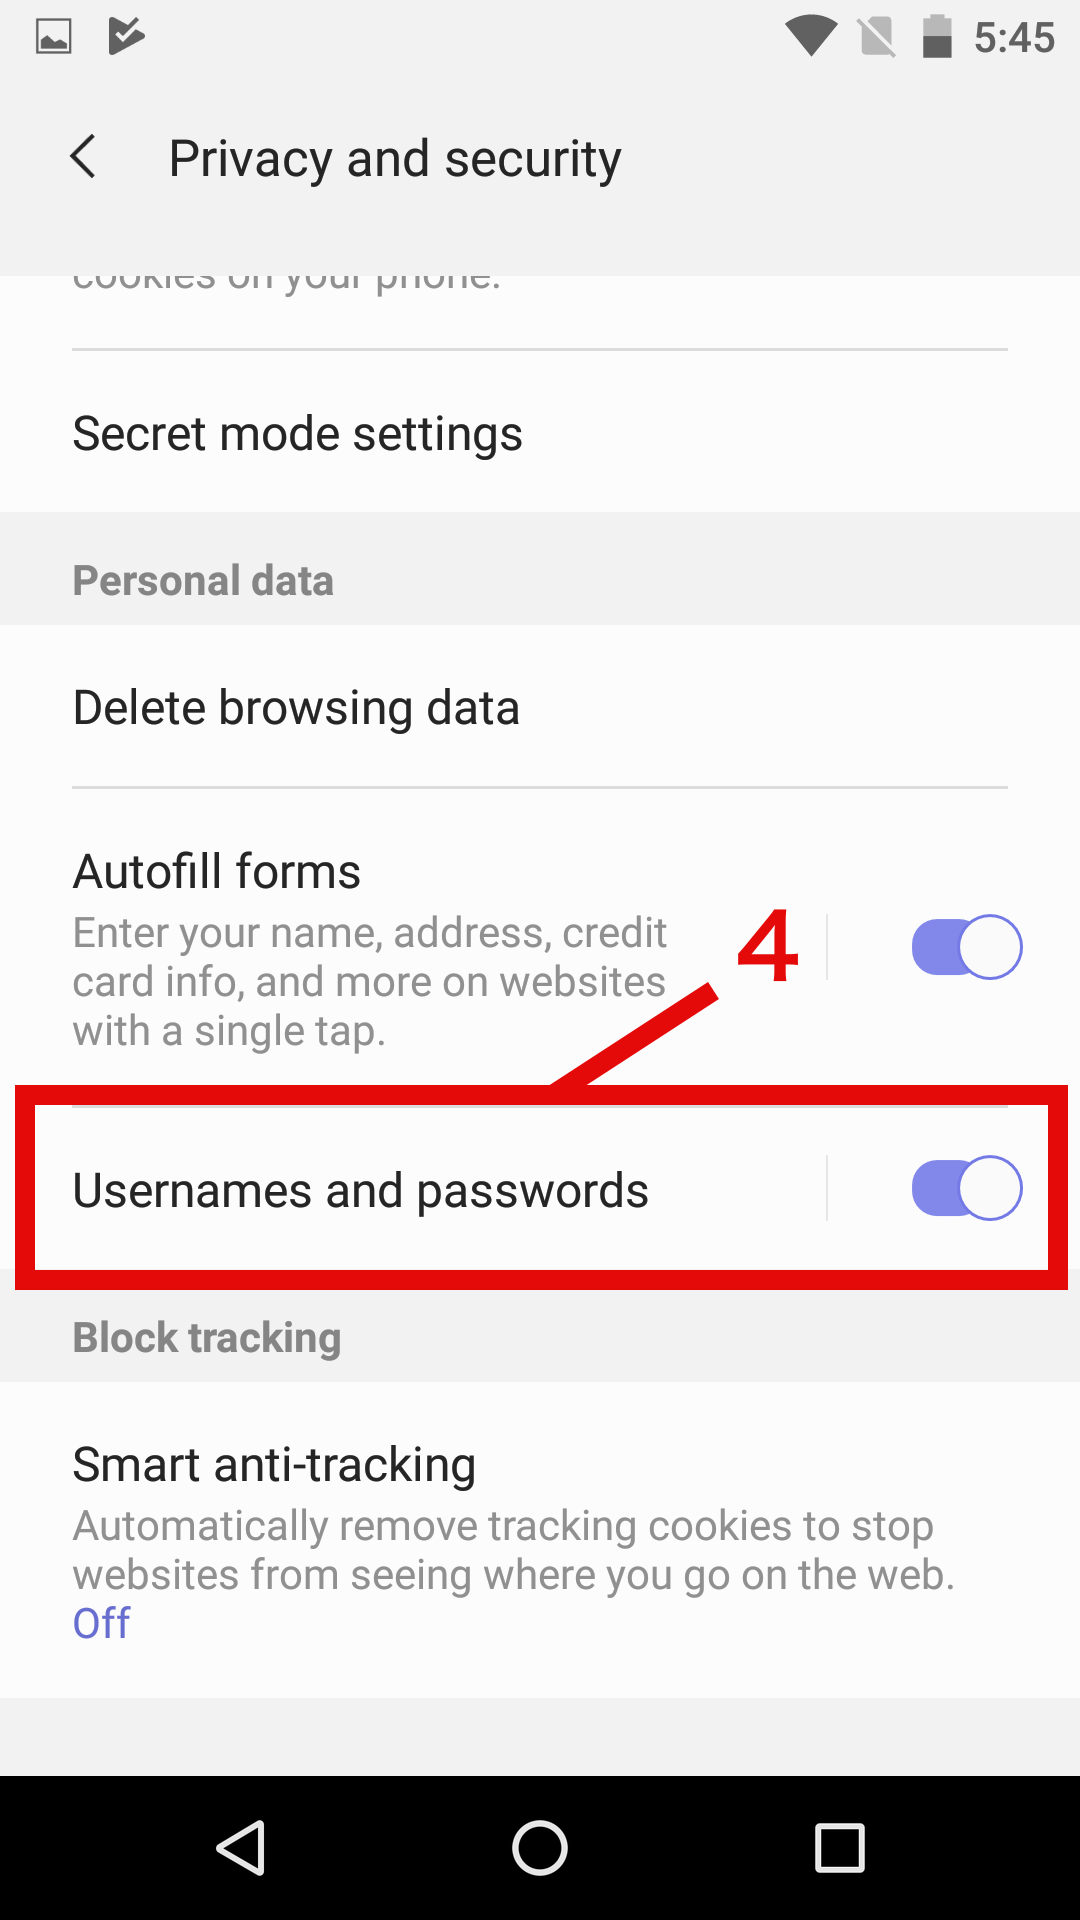 4. Tap Usernames and passwords